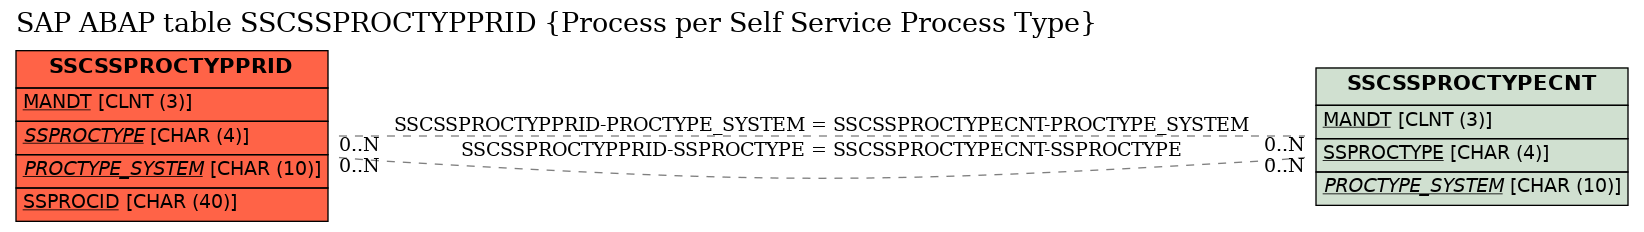 E-R Diagram for table SSCSSPROCTYPPRID (Process per Self Service Process Type)